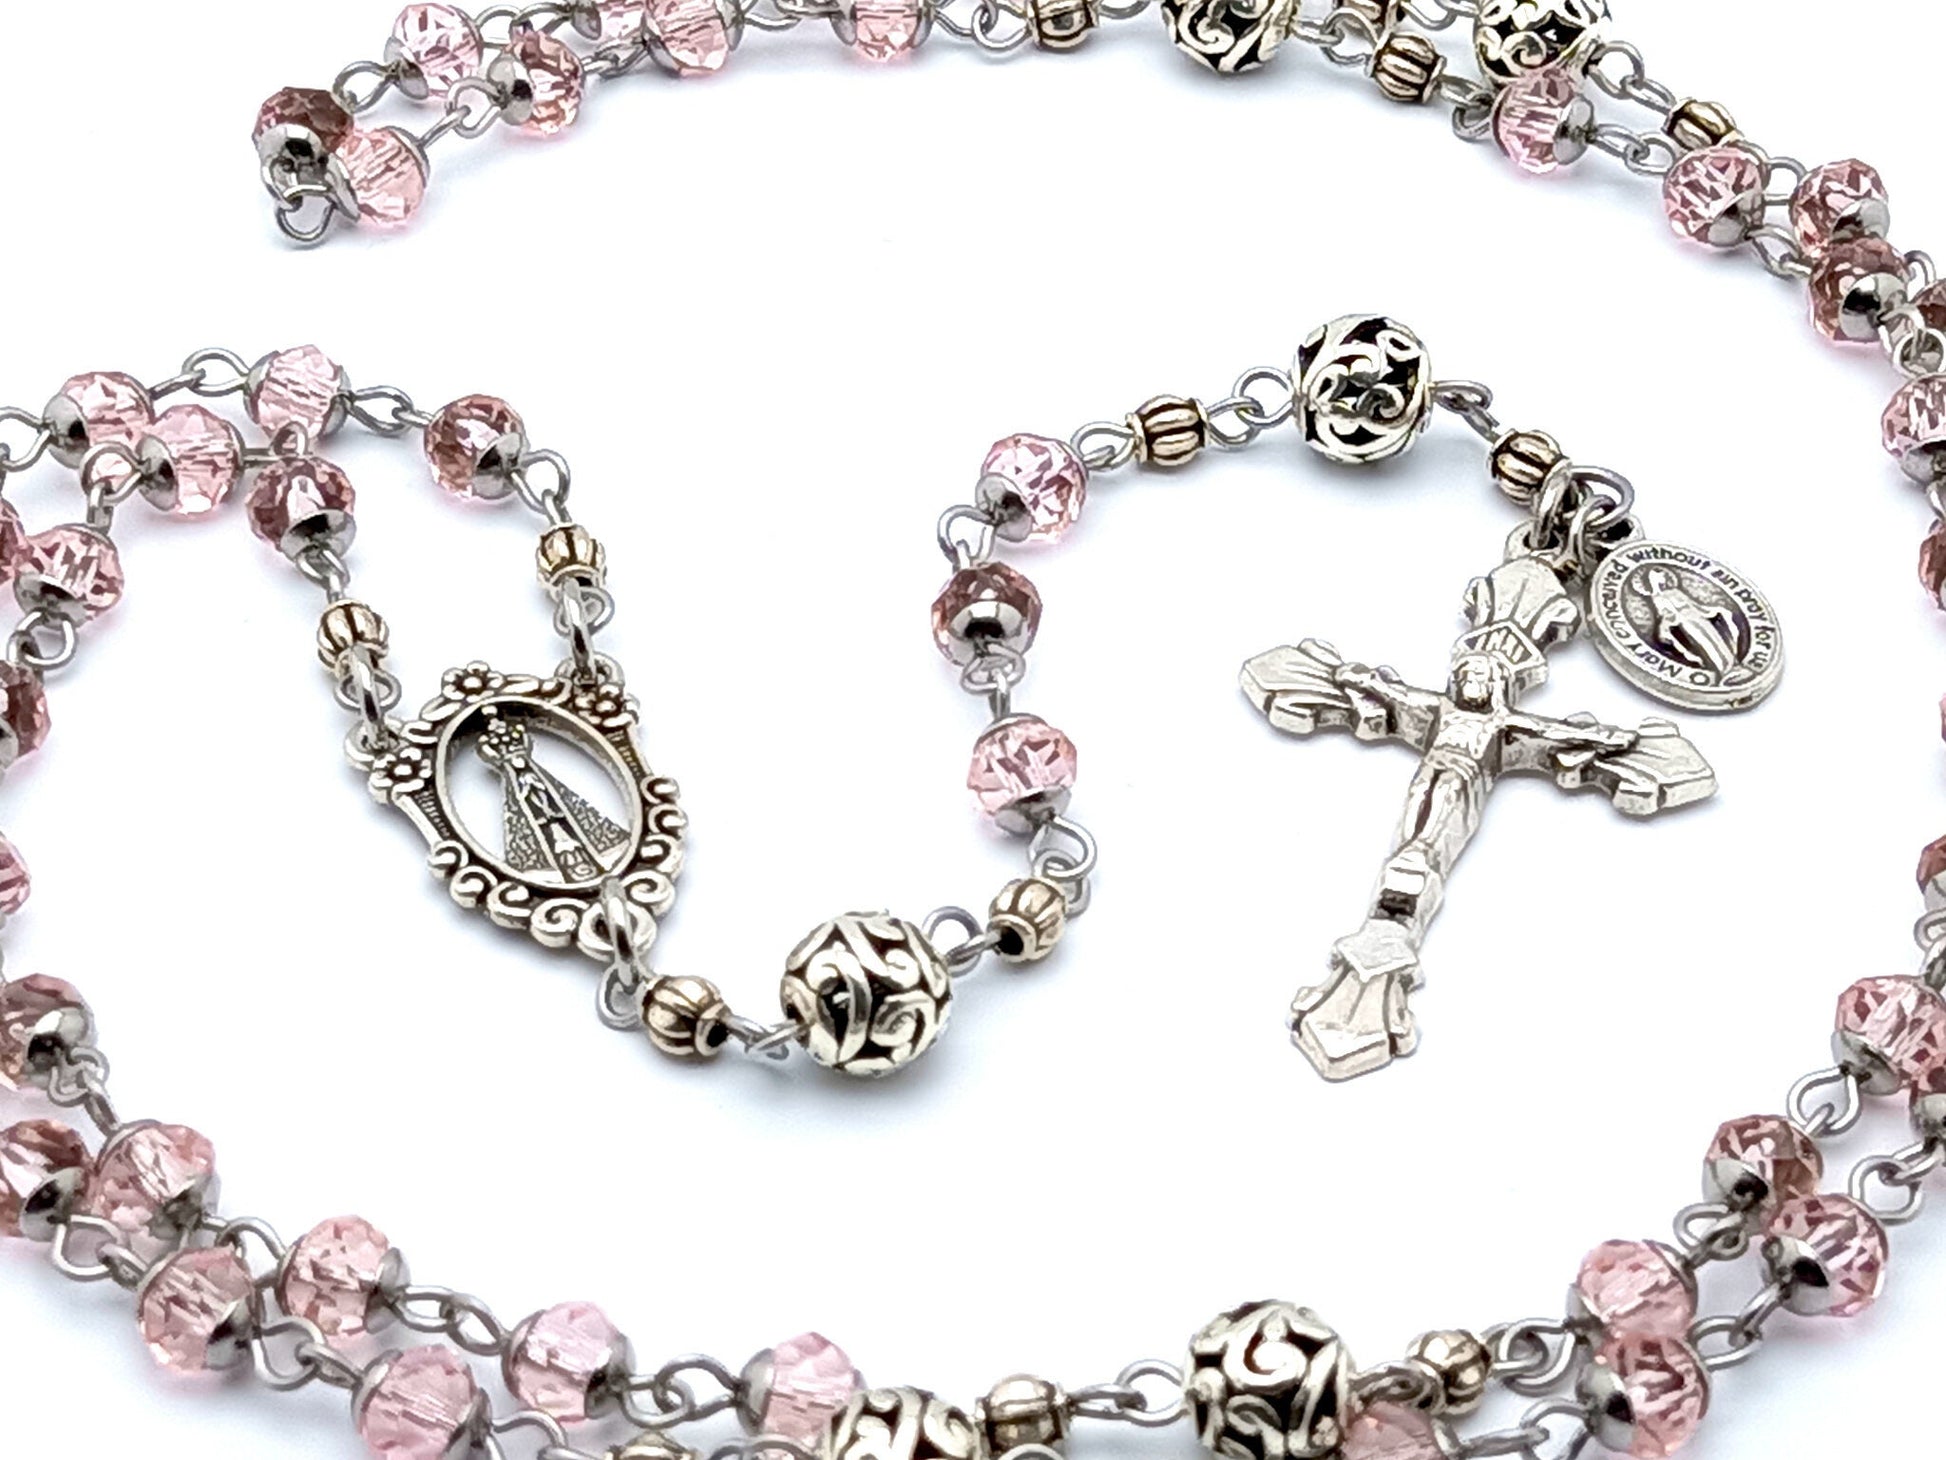 Our Lady of Charity unique rosary beads pink glass and Tibetan silver rosary beads with silver crucifix and a Miraculous medal.